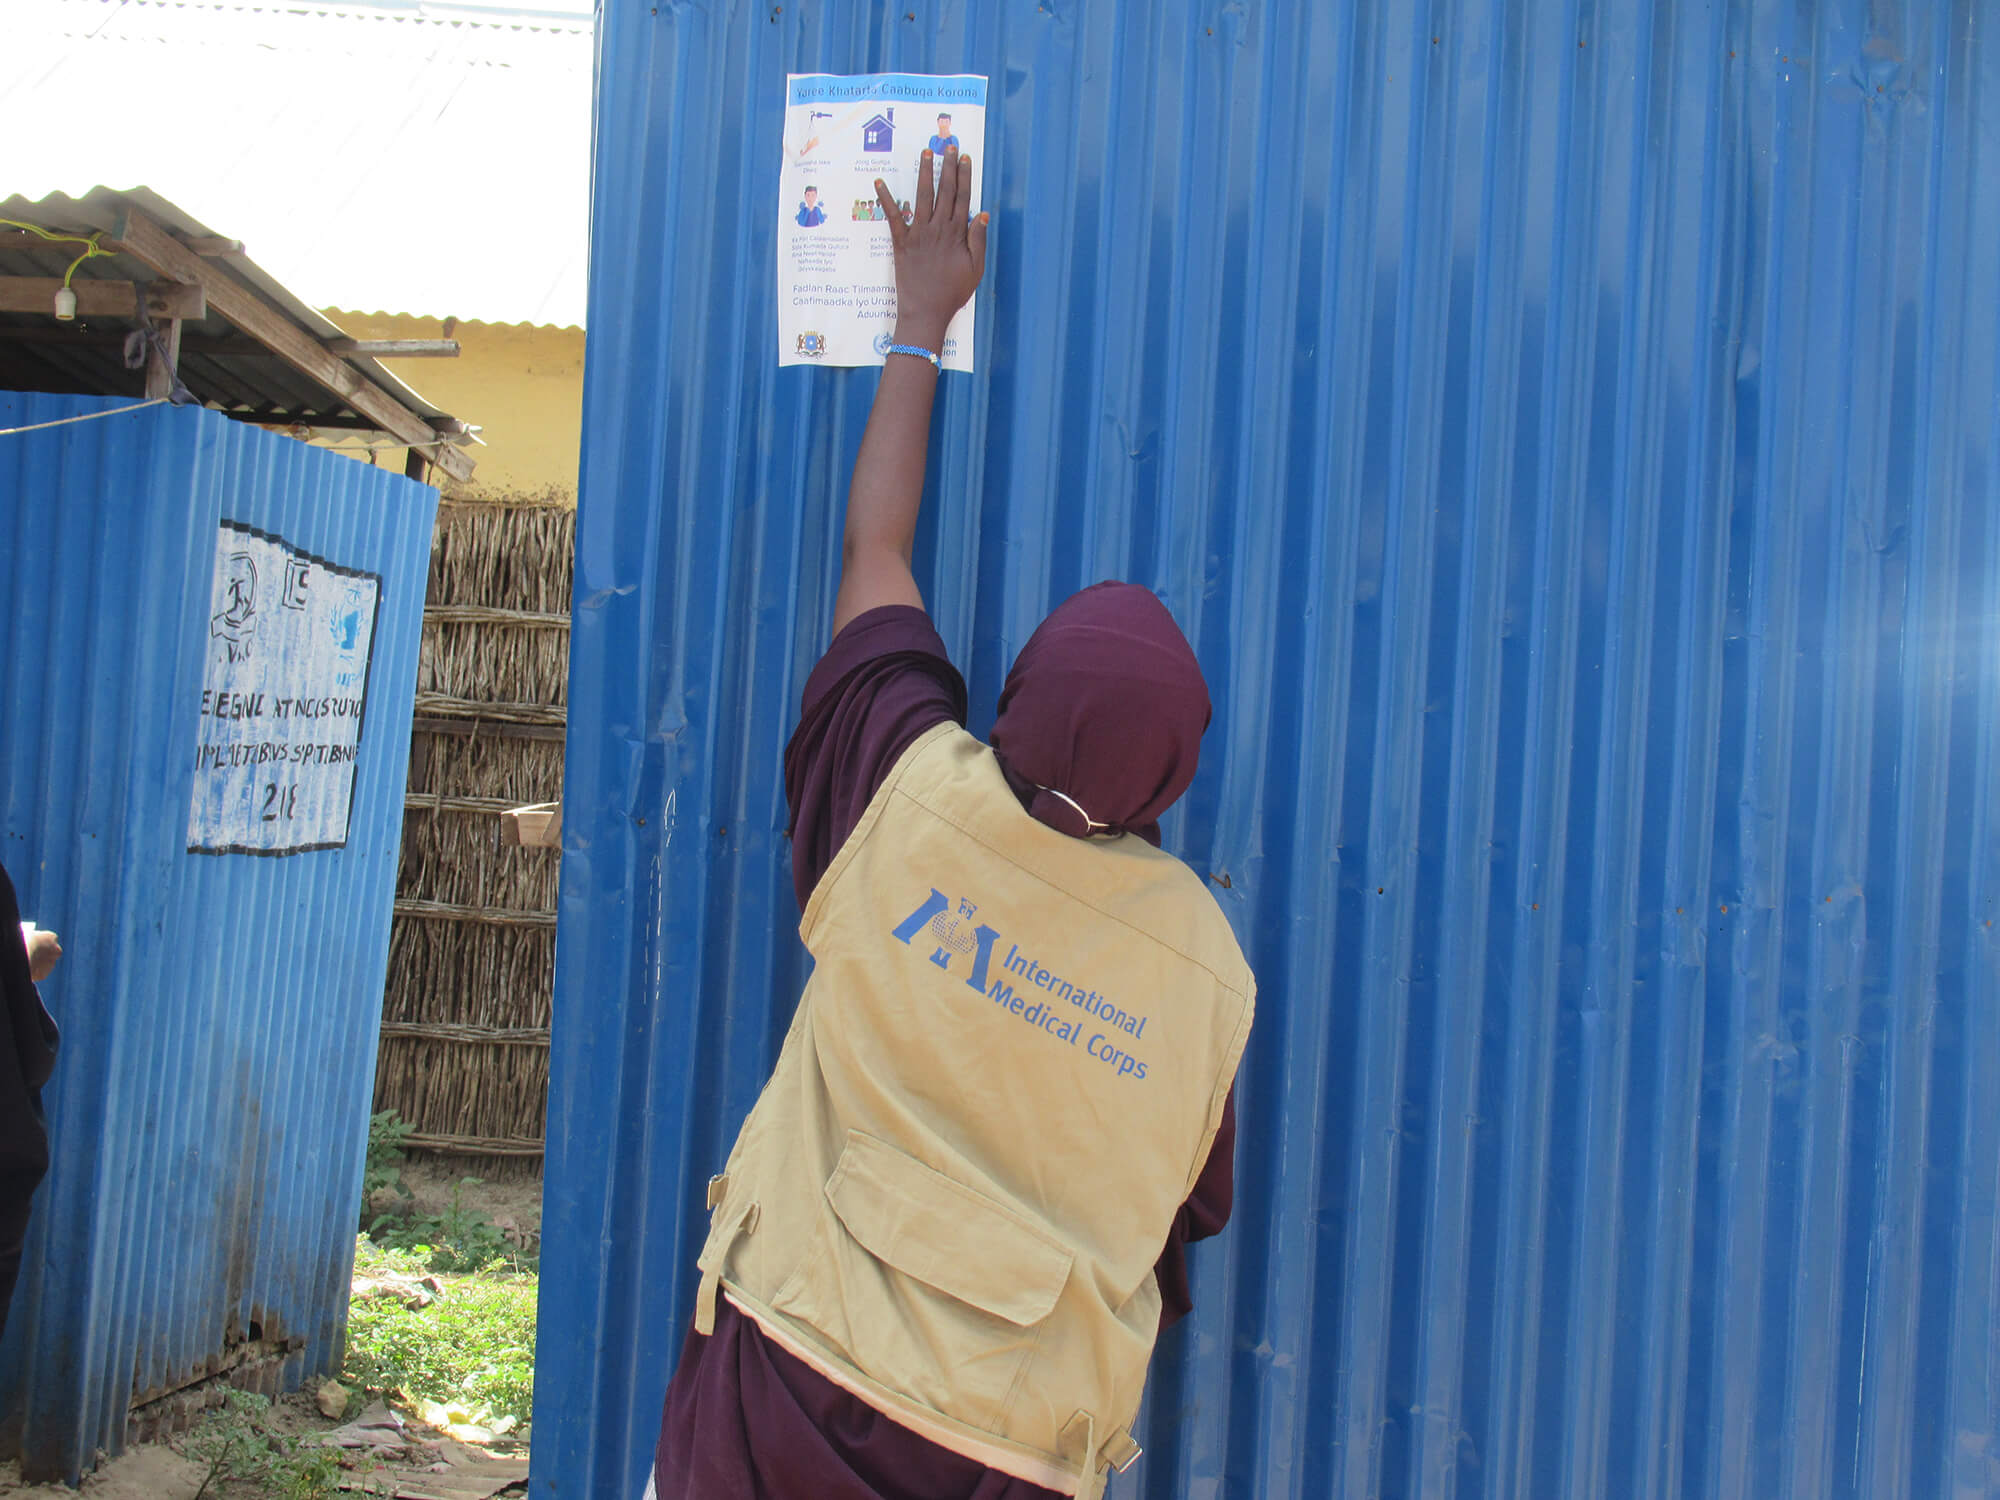 A health worker spreads awareness to the community about COVID-19 in an IDP camp in Somalia.